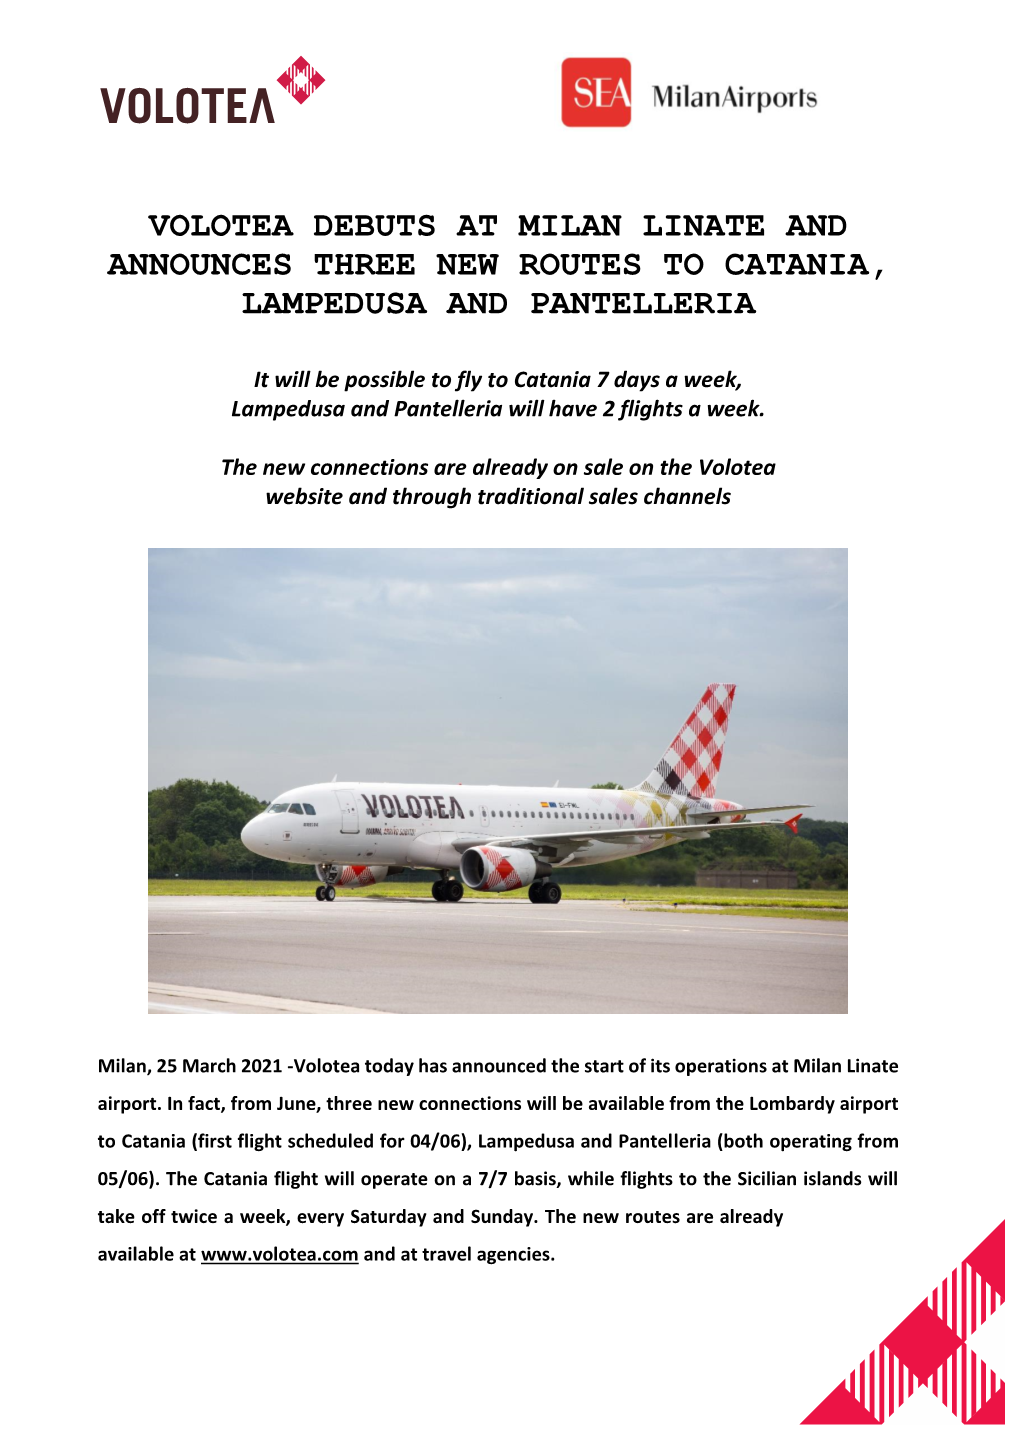 Volotea Debuts at Milan Linate and Announces Three New Routes to Catania, Lampedusa and Pantelleria